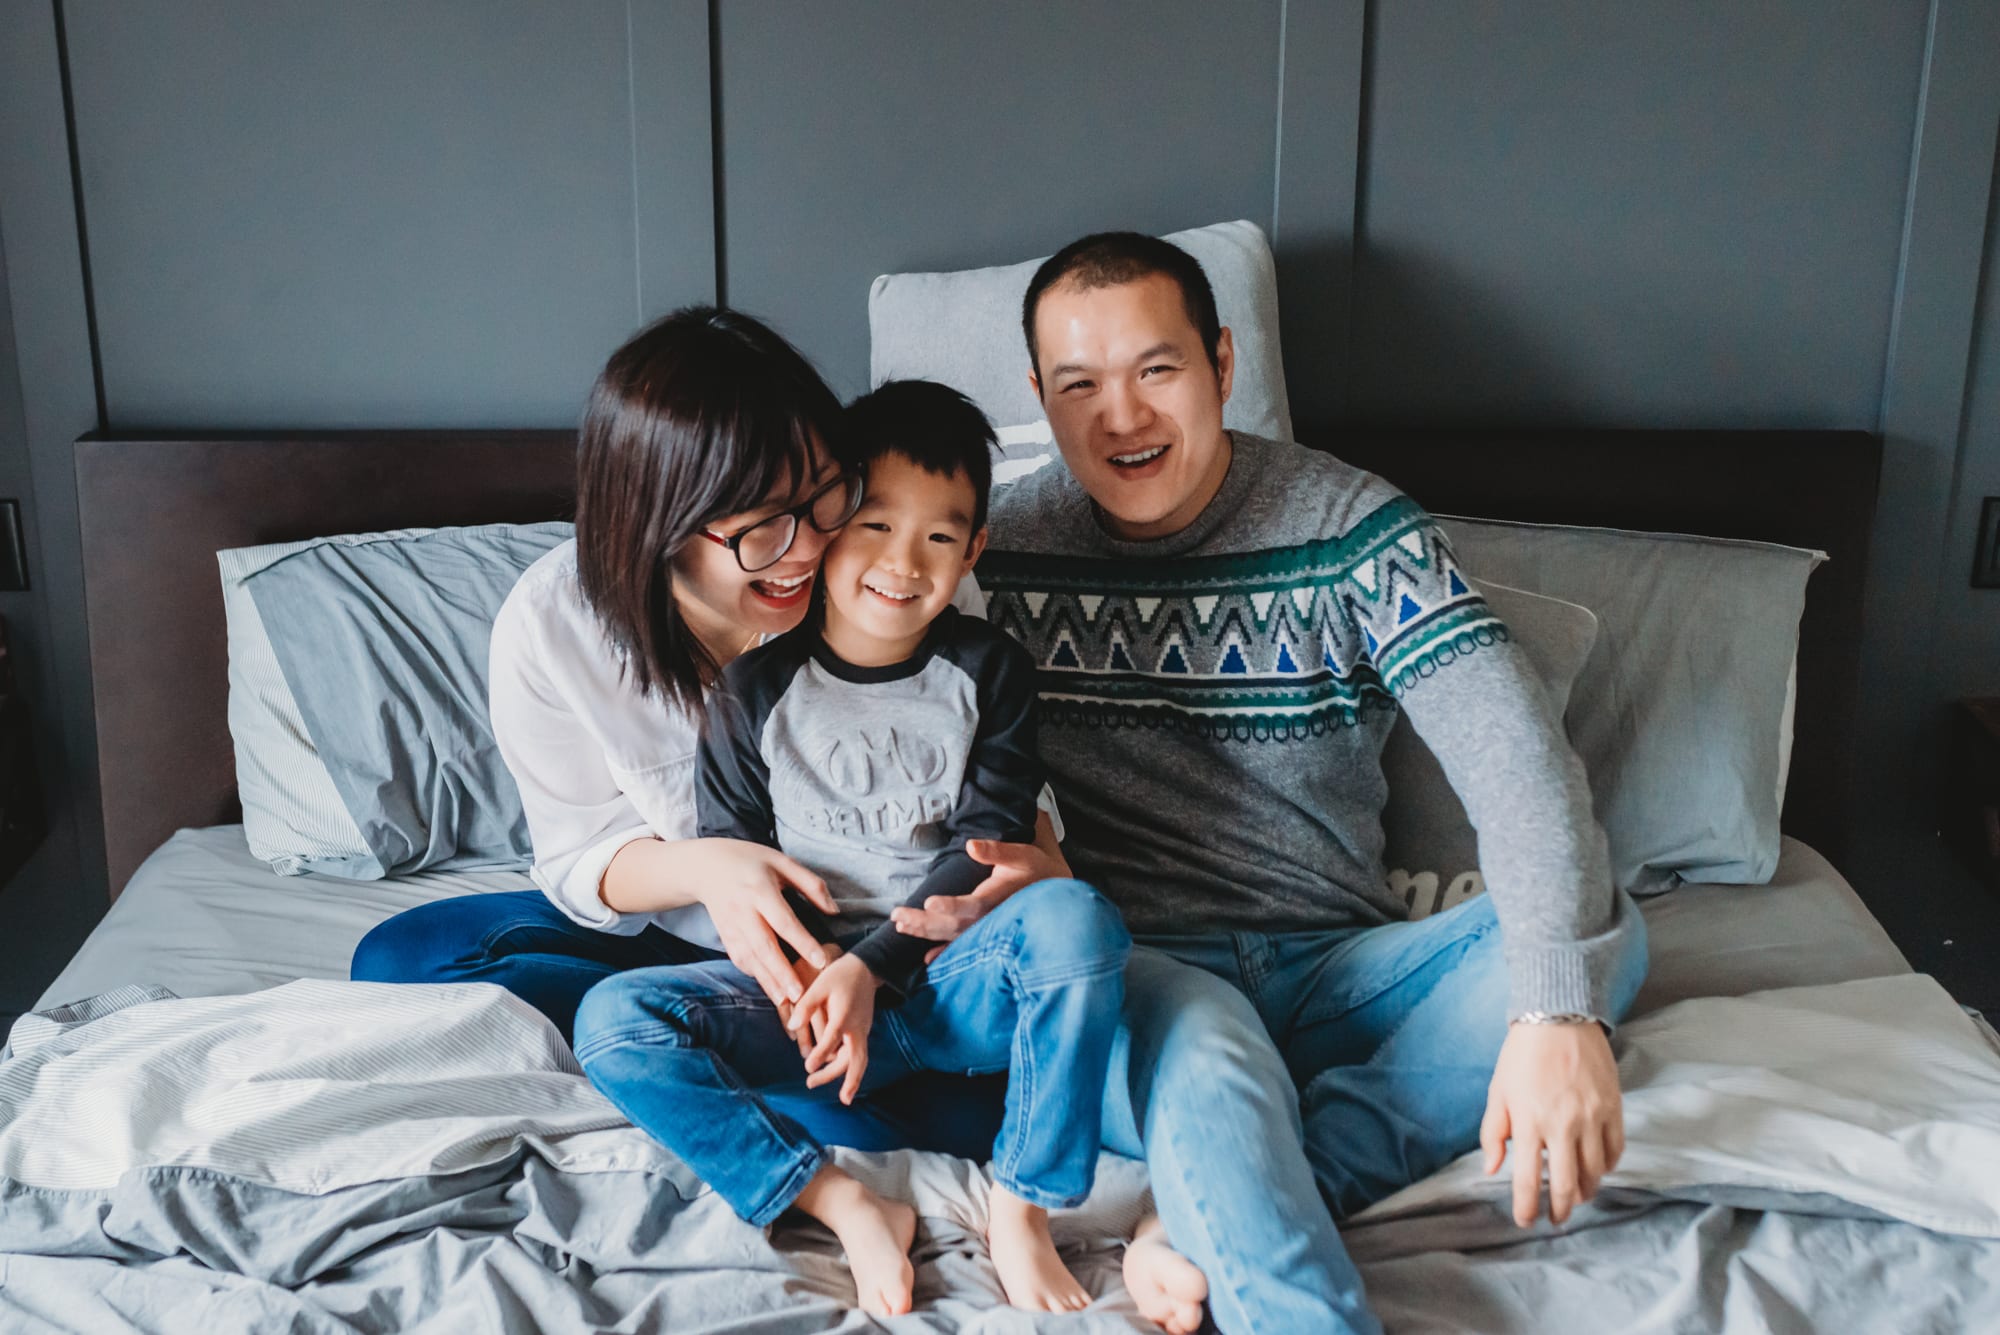 Fun family photo of Asian parents and their son laughing on the bed in the master bedroom.